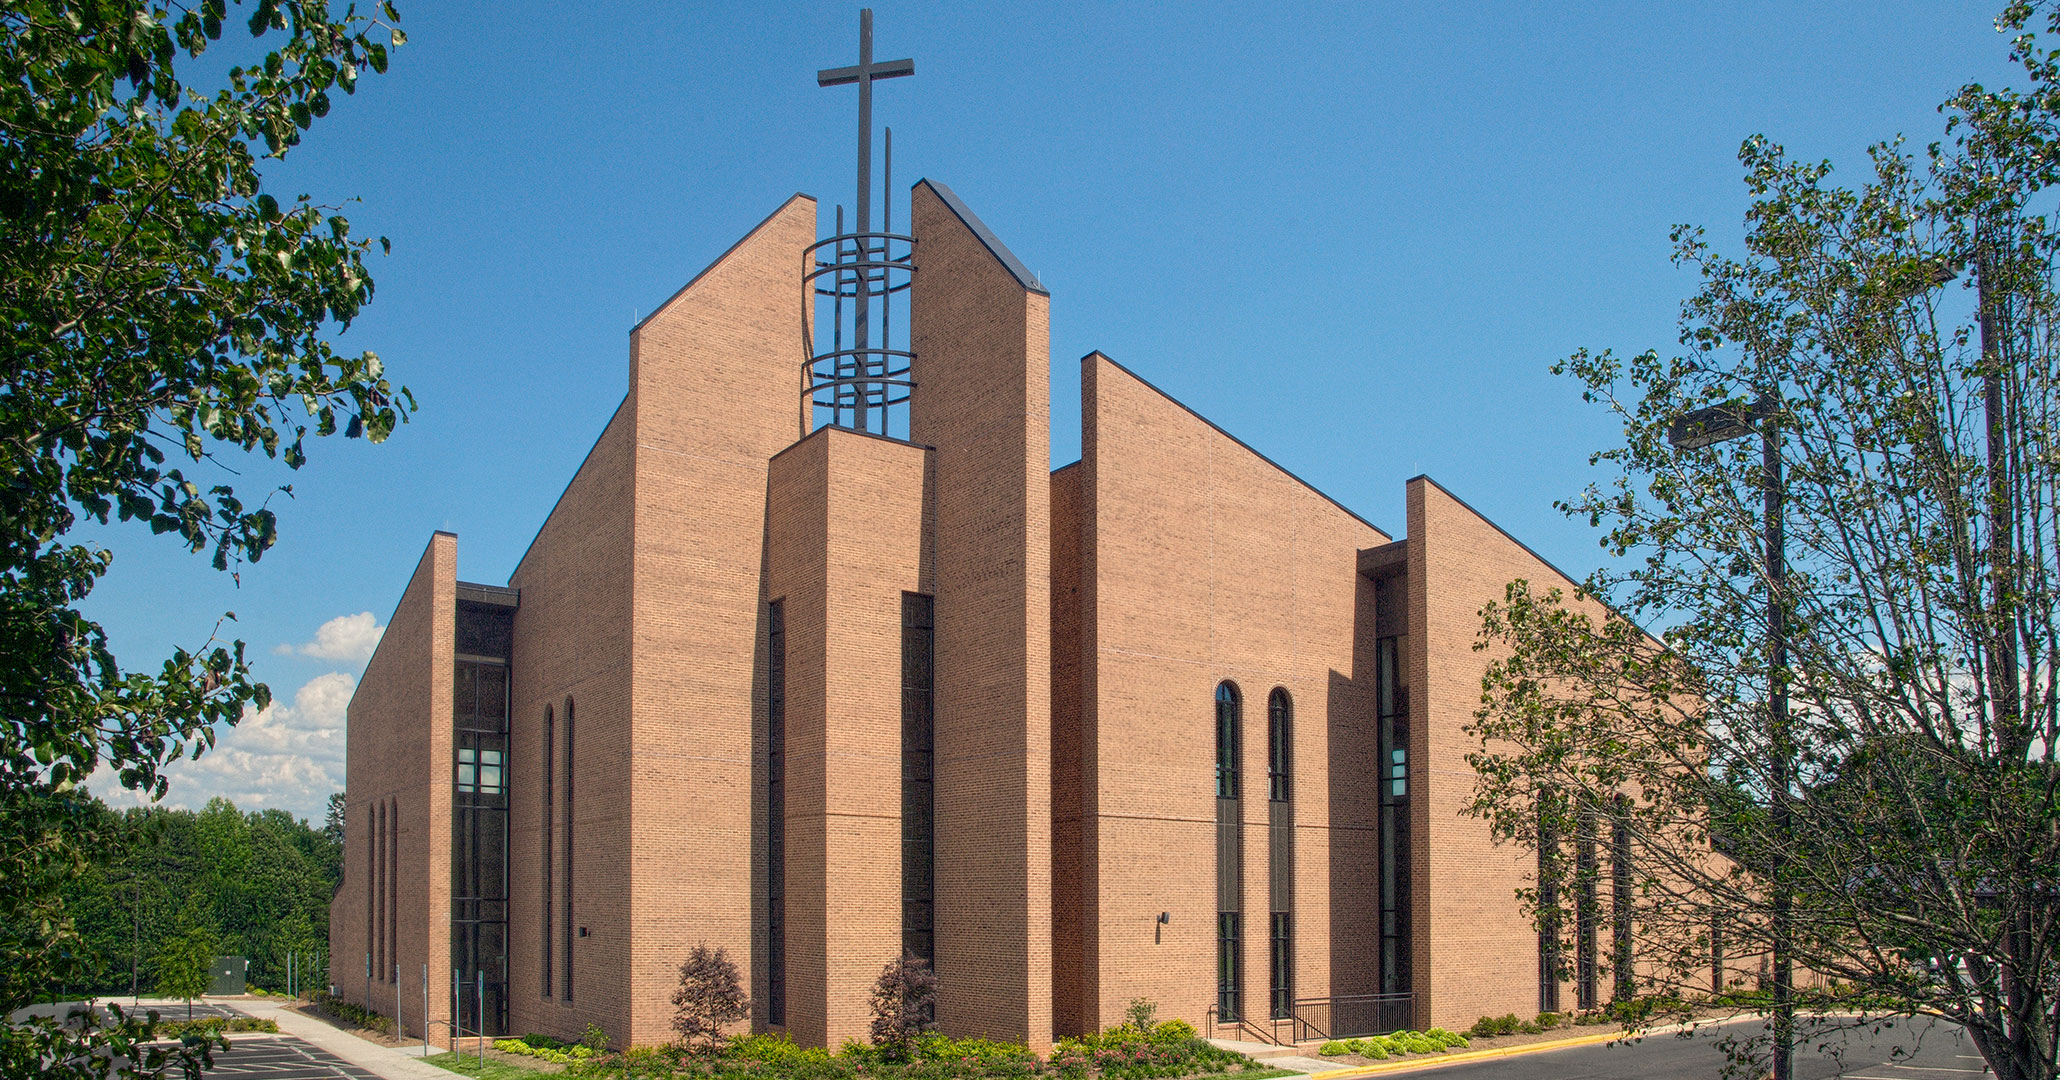 Boudreaux is experienced in designing Catholic churches, working with St. Therese in Mooresville, NC we designed a space that serves as a spiritual space.